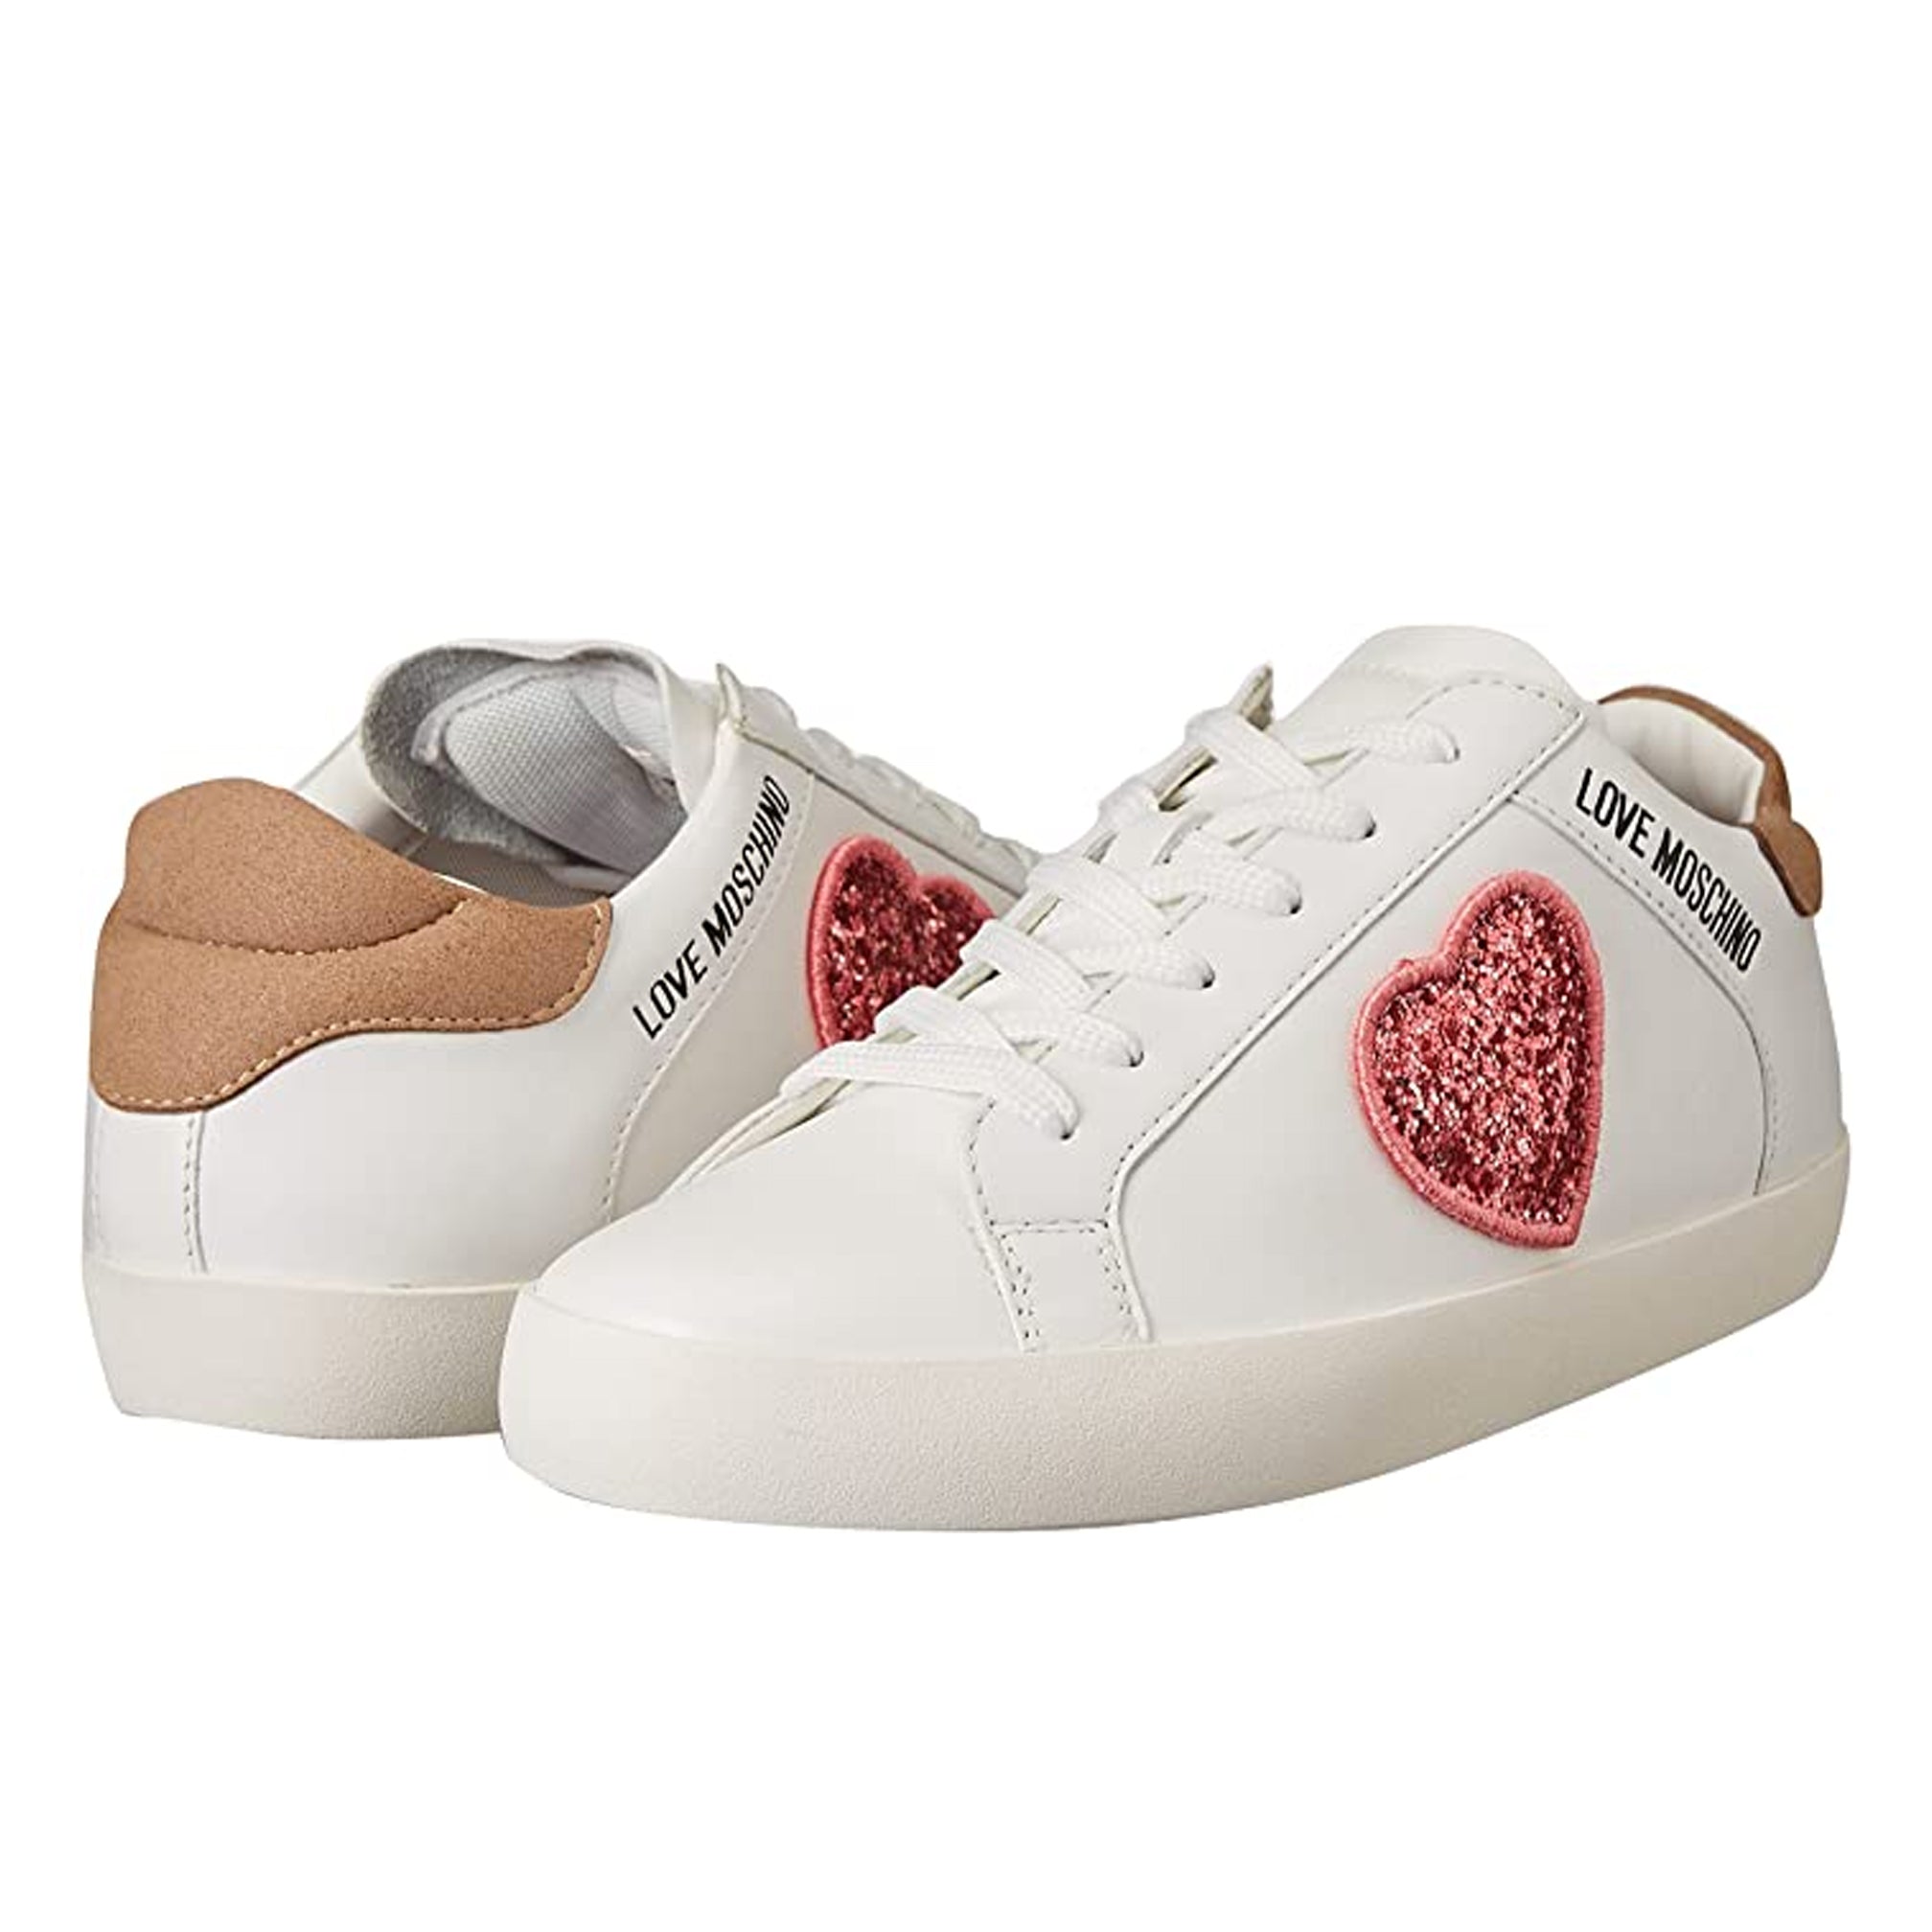 Love Moschino Womens White Leather Sneakers